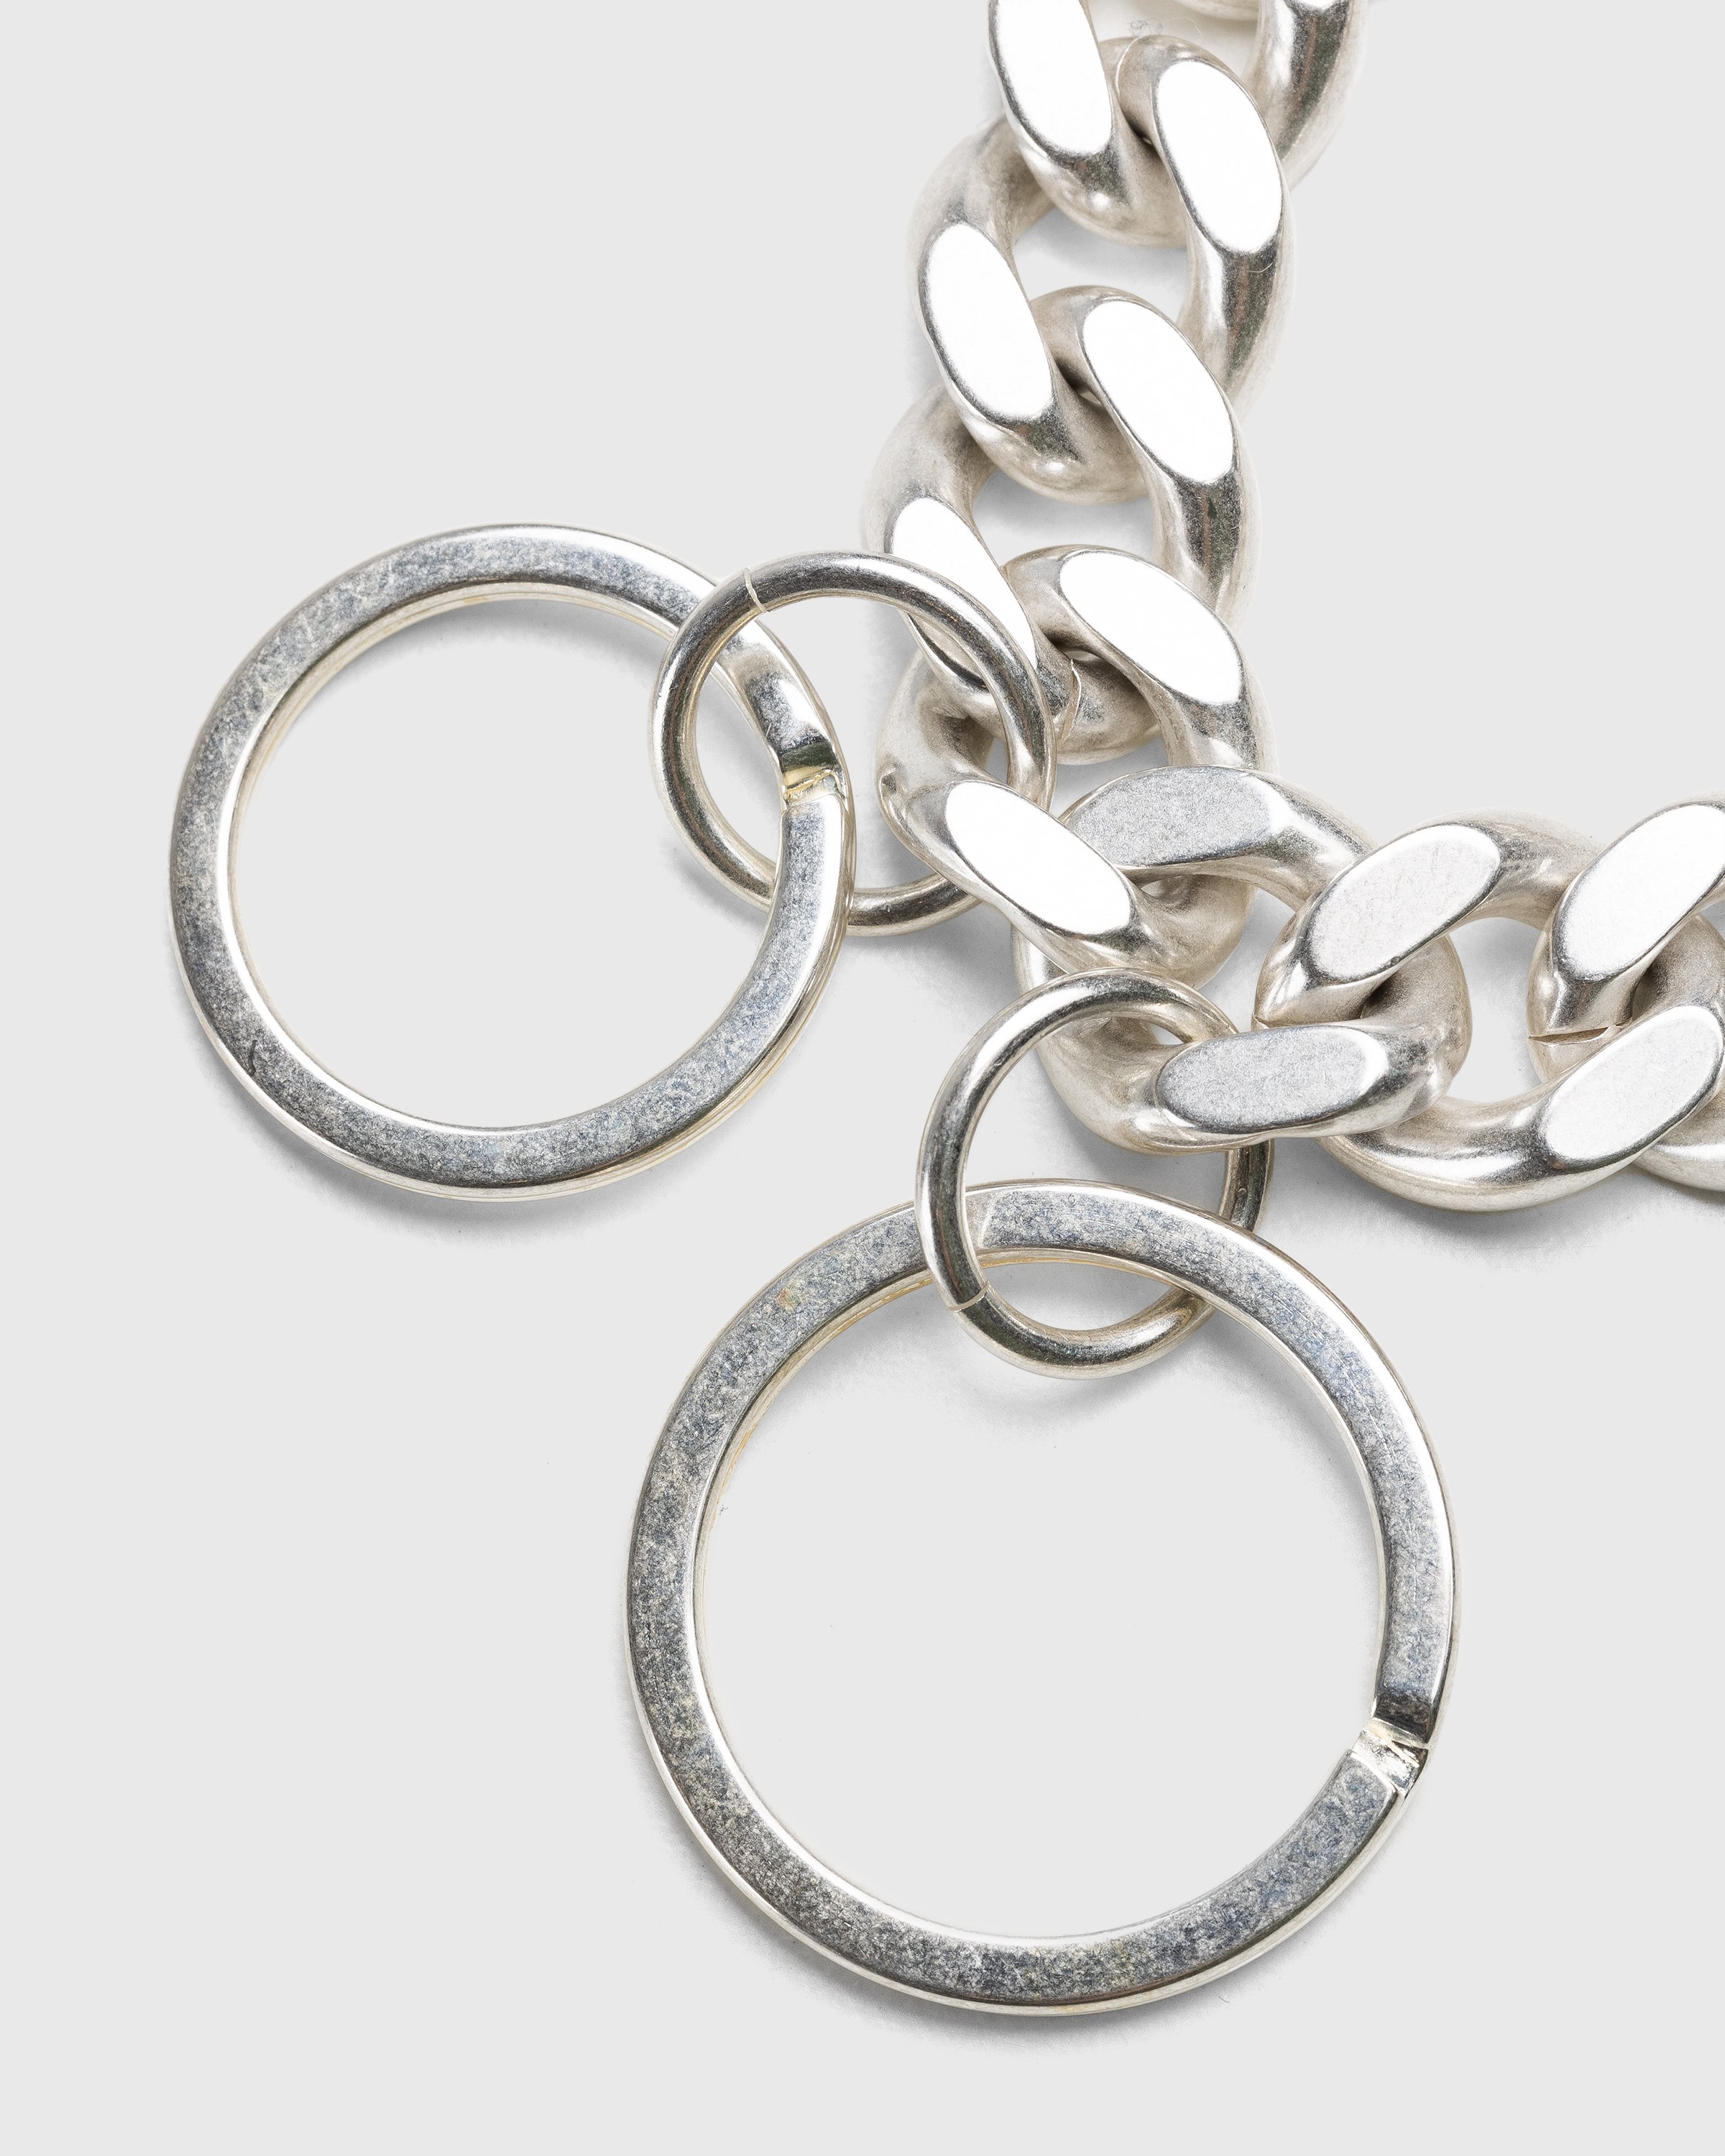 Jil Sander - Chain Link Key Ring Silver - Accessories - Silver - Image 2